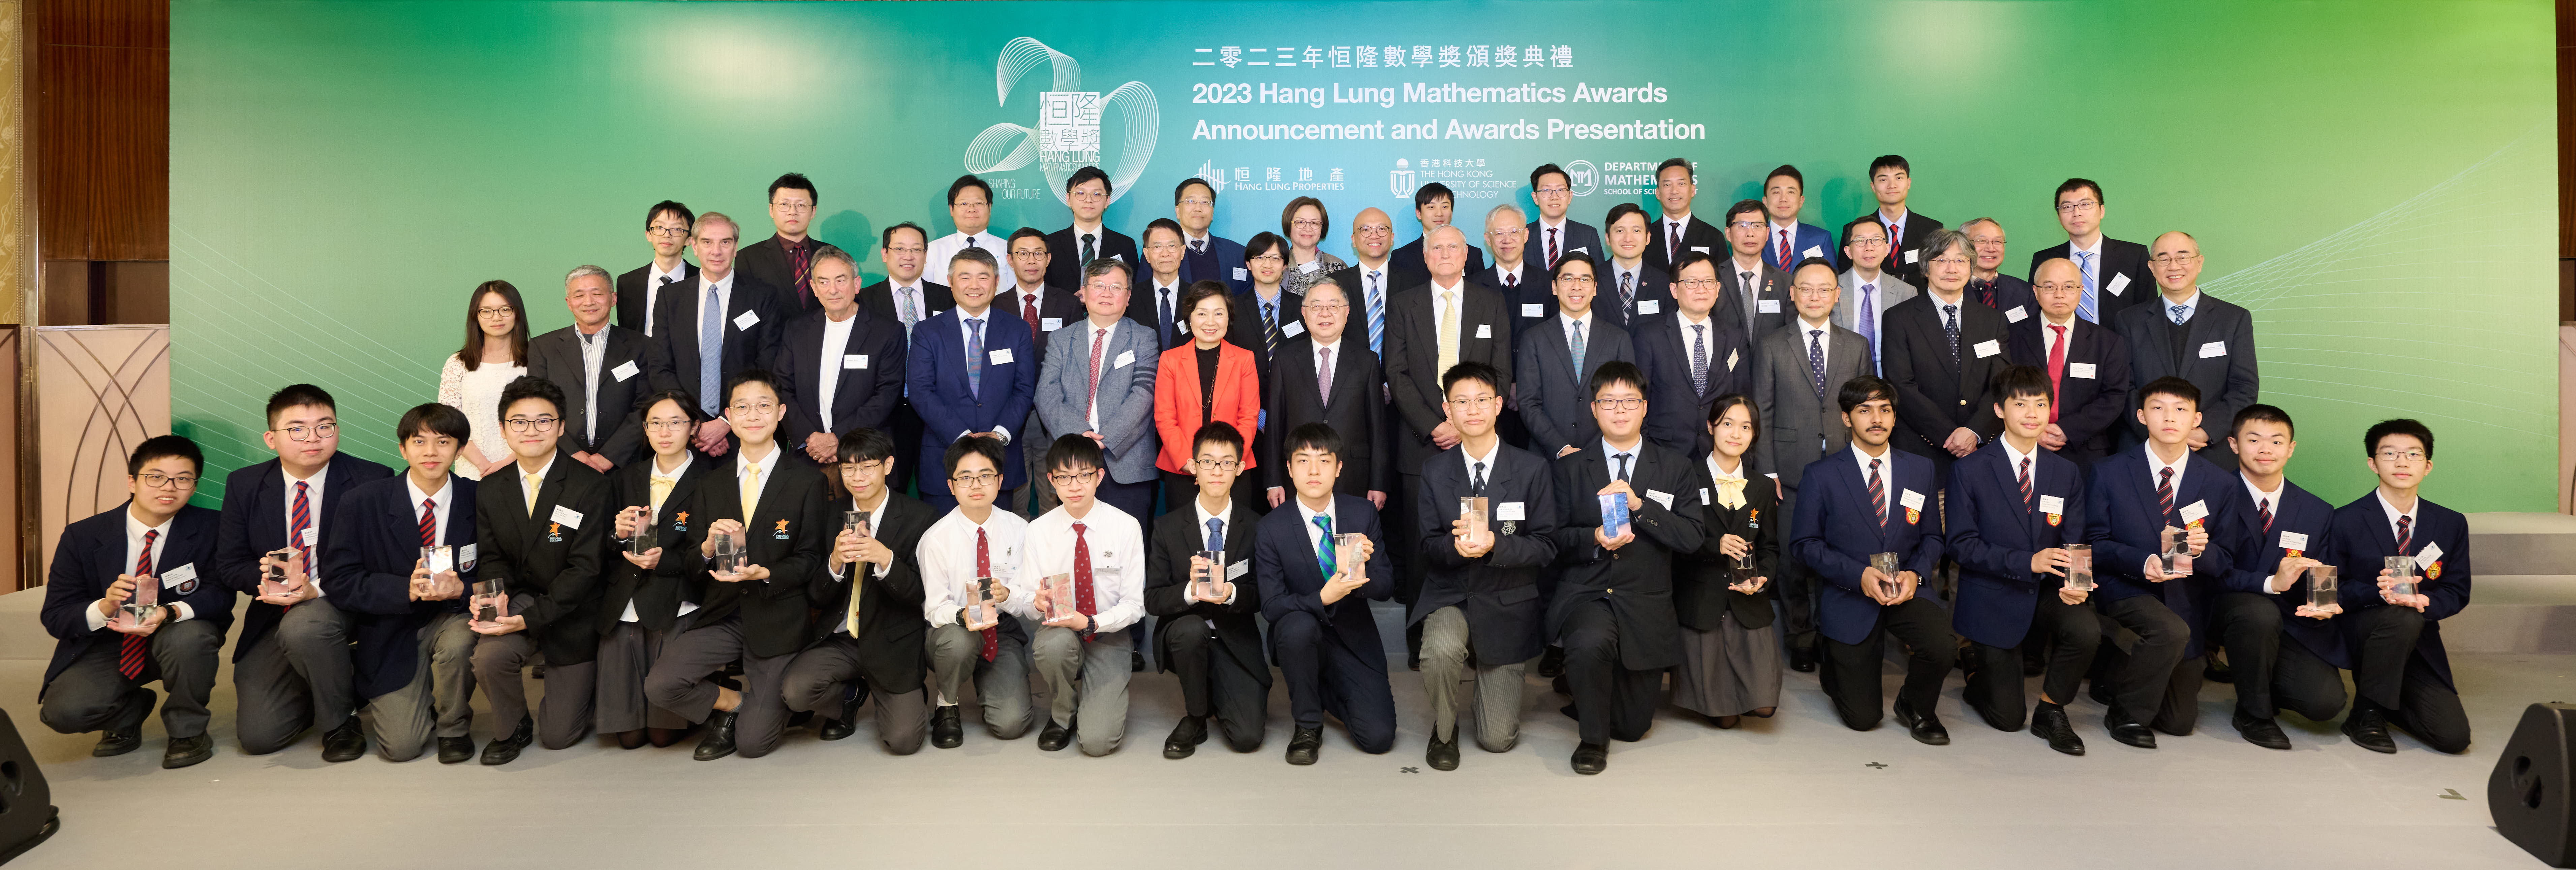 A photo of the winning teams of the 2023 Hang Lung Mathematics Awards with Dr. Christine Choi, Secretary for Education of the Hong Kong Special Administrative Region, Mr. Ronnie C. Chan, Chair; Mr. Adriel Chan, Vice Chair, and Mr. Weber Lo, Chief Executive Officer of Hang Lung Properties; Professor Yike Guo, Provost of Hong Kong University of Science and Technology; 2023 Hang Lung Mathematics Awards Scientific Committee Chair, Professor Richard Schoen, 2017 Wolf Prize Laureate in Mathematics, and members of Scientific Committee, Steering Committee, Executive Committee, and Screening Panel